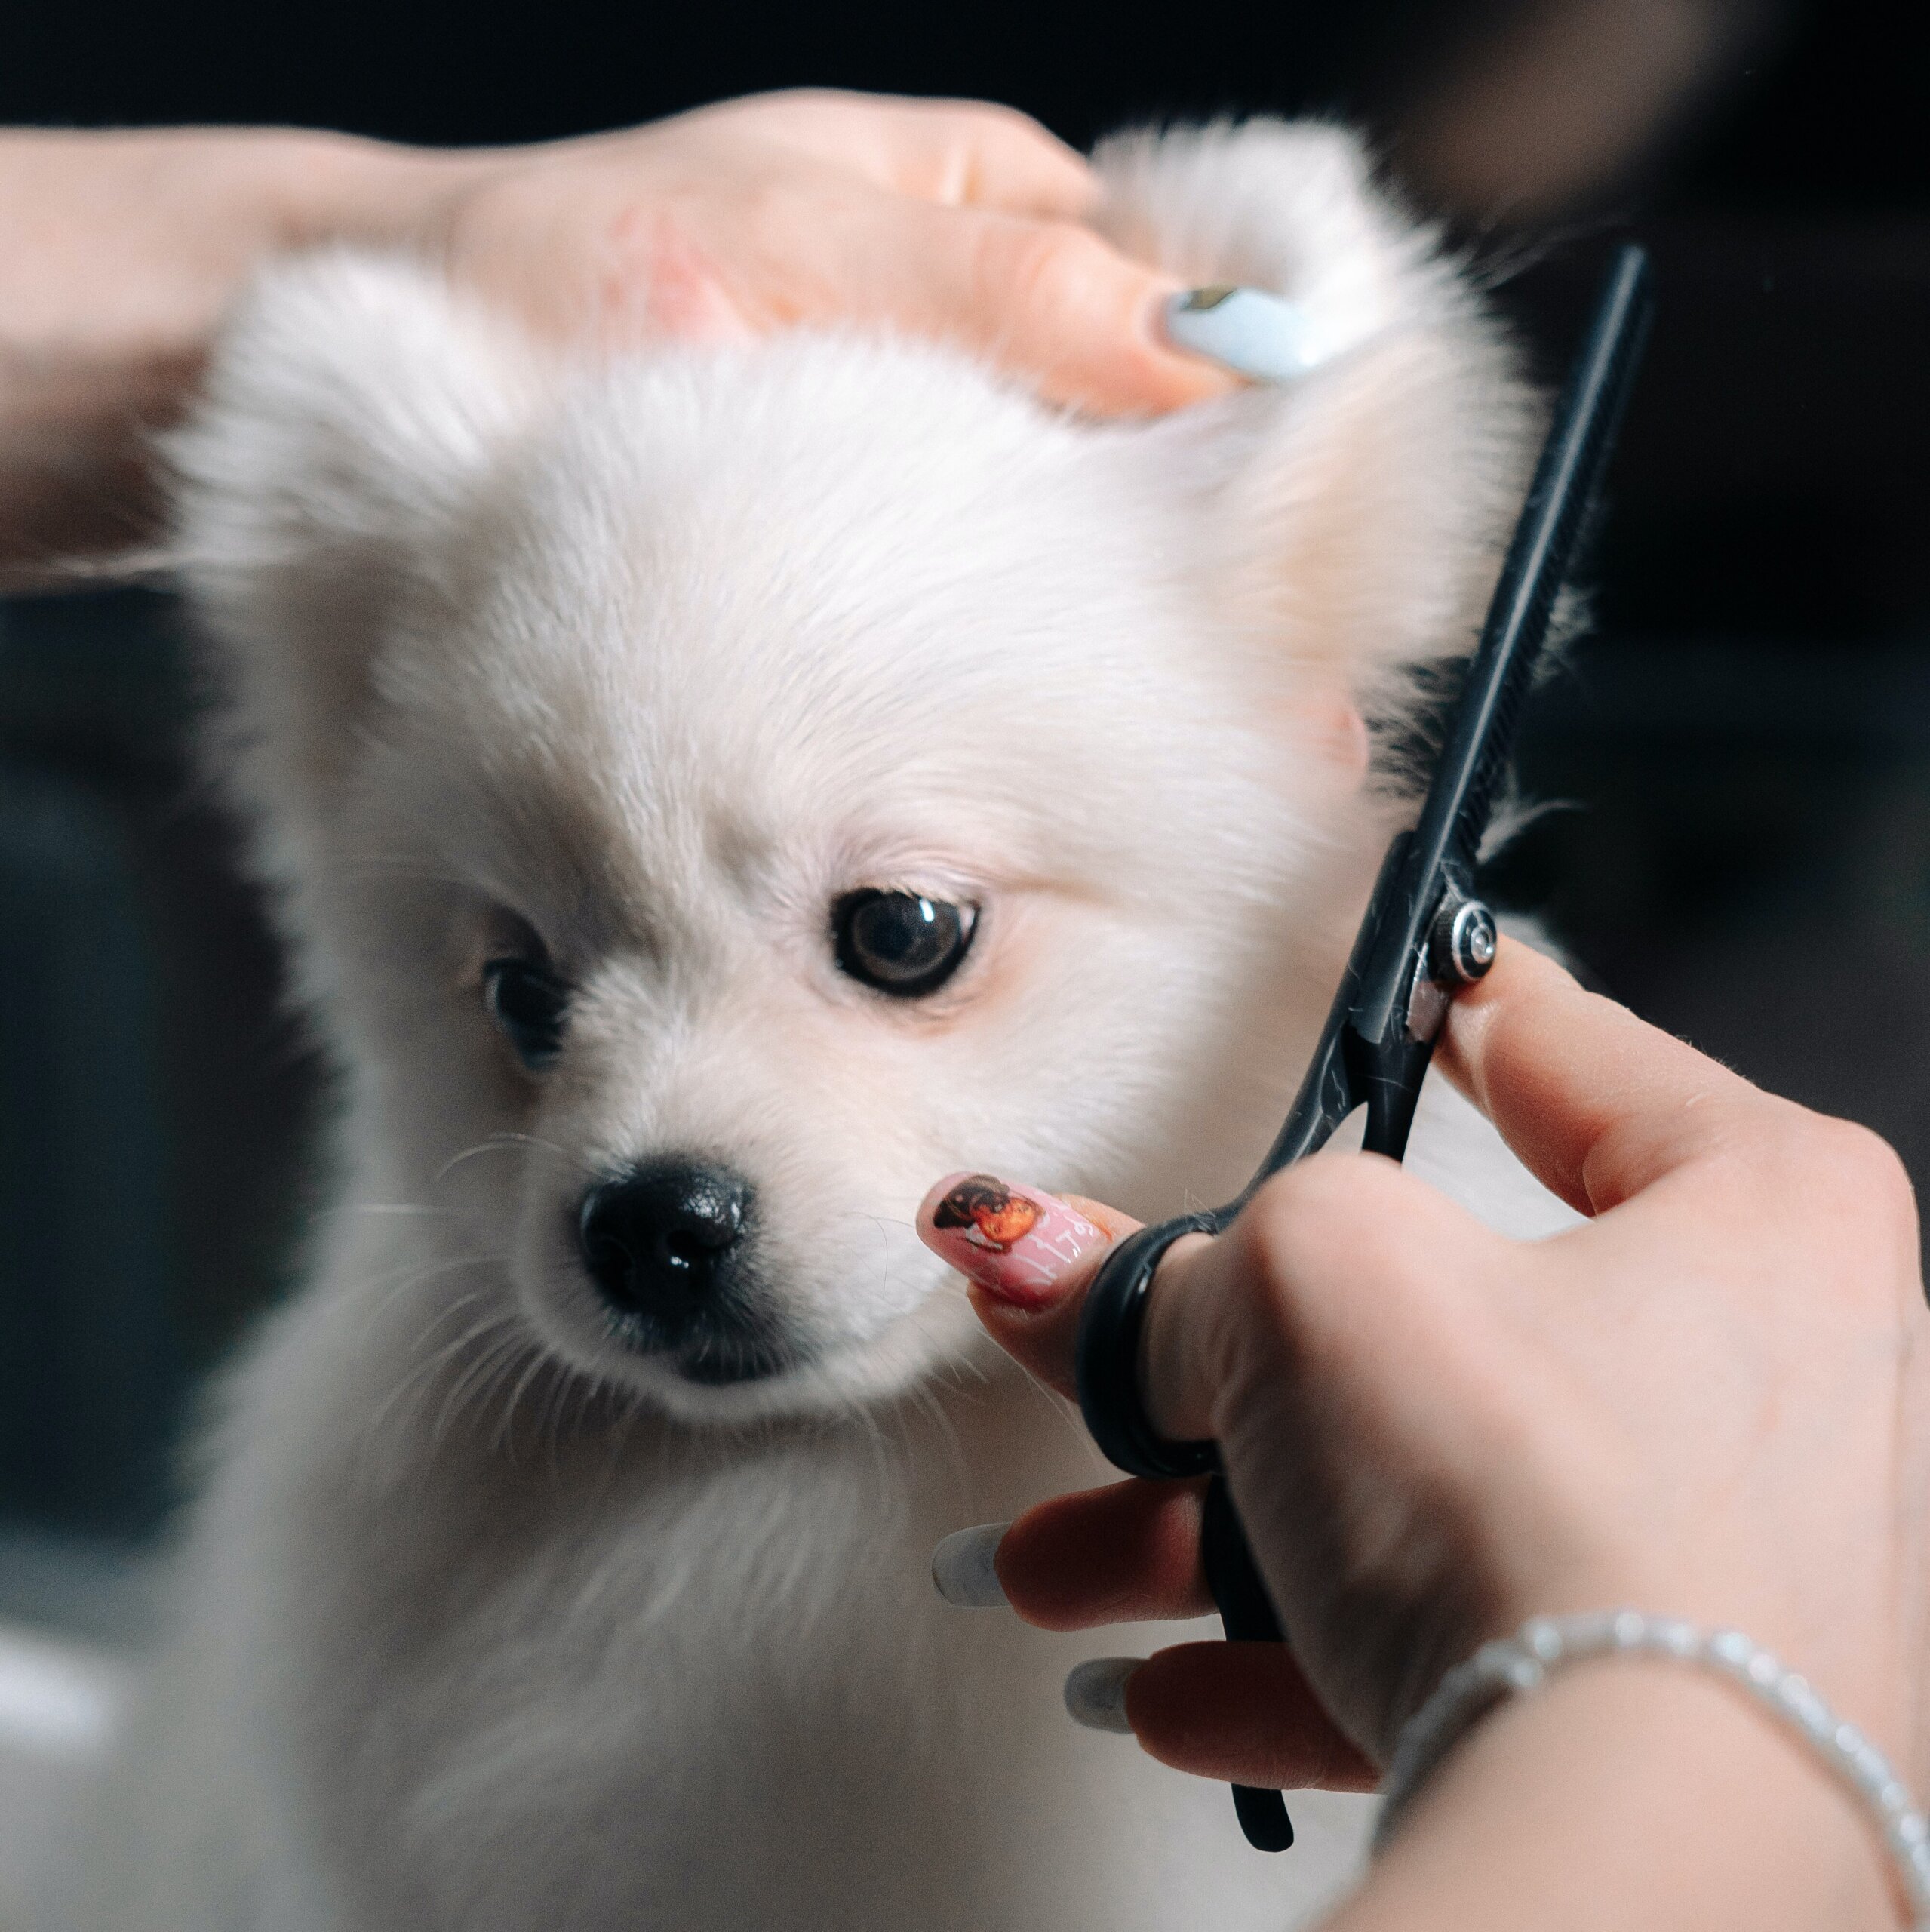 dog getting groomed with scissors